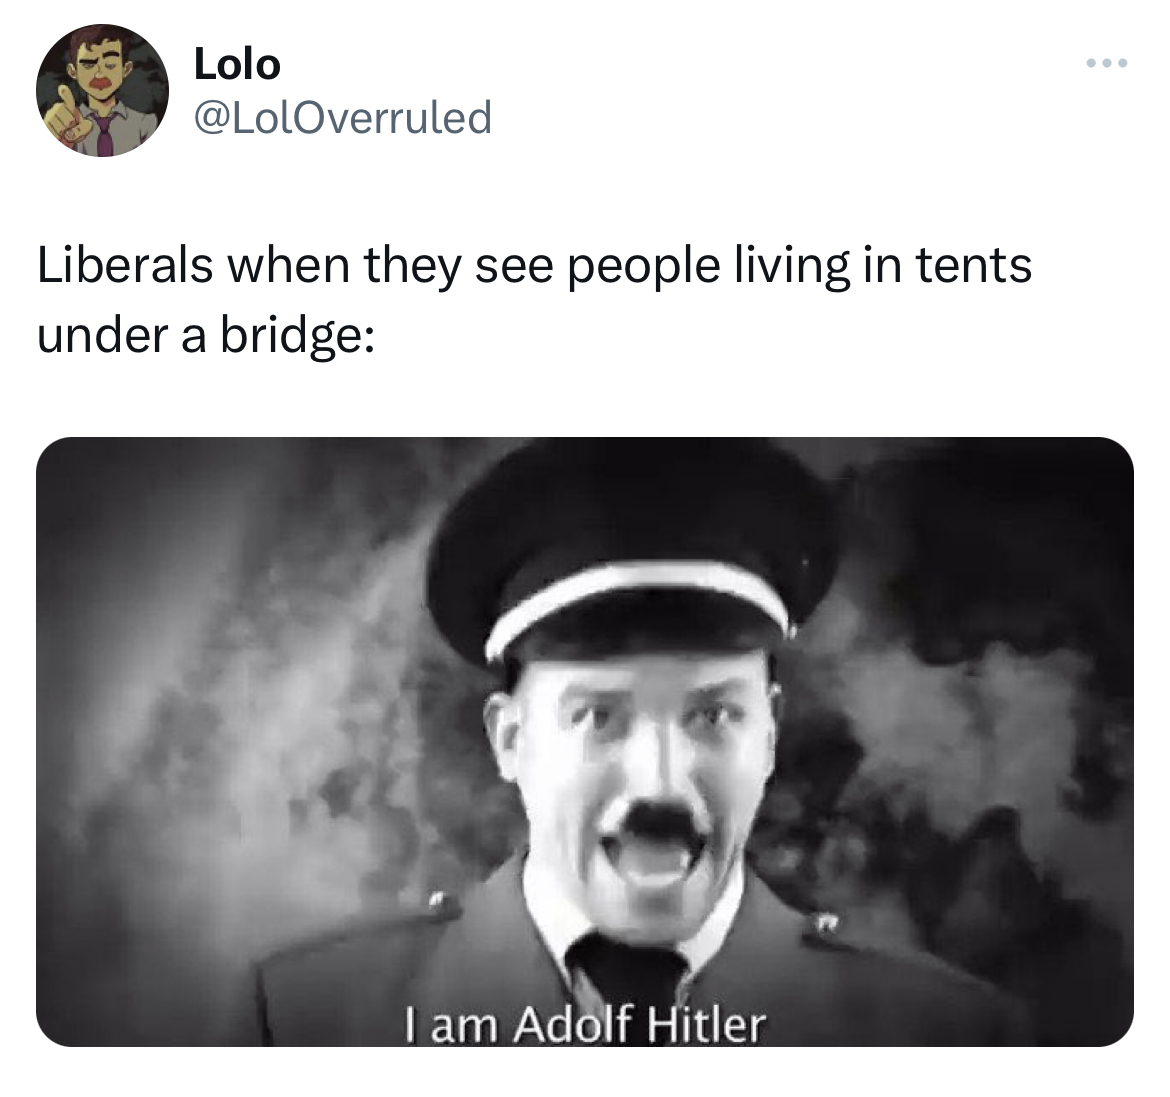 savage tweets - Video - Lolo Liberals when they see people living in tents under a bridge I am Adolf Hitler